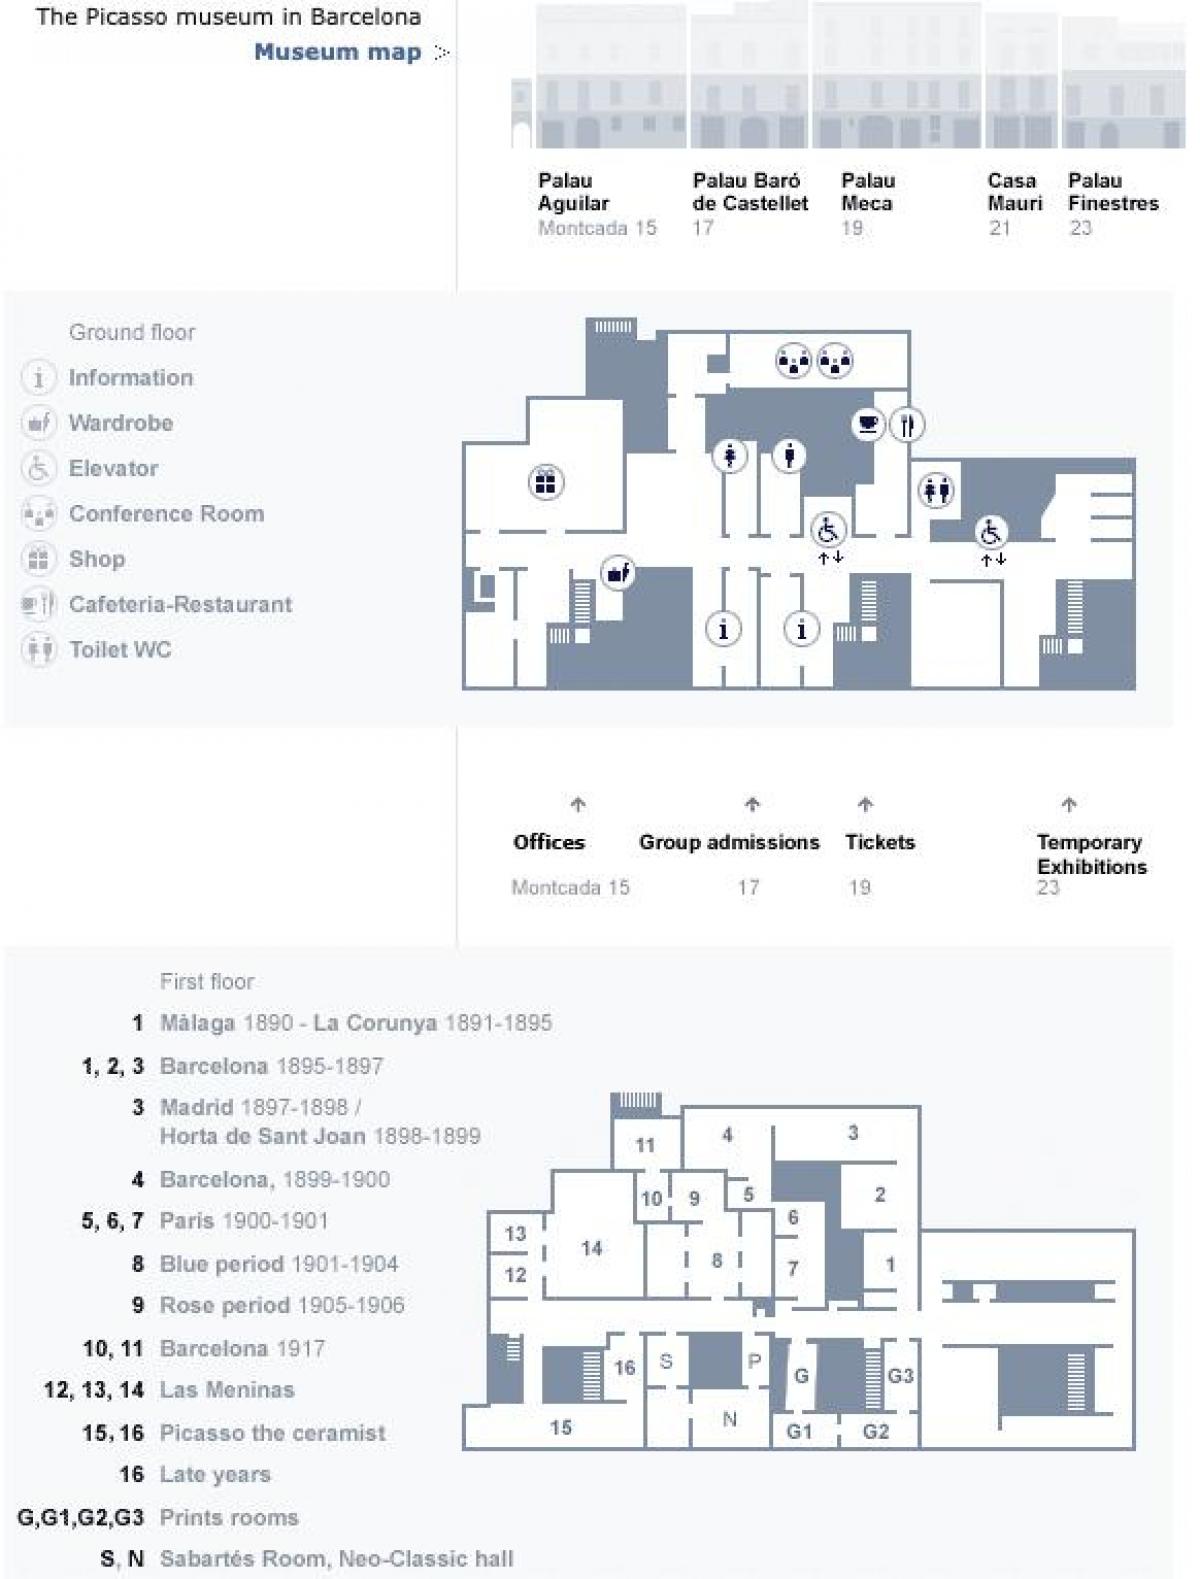 map of picasso museum barcelona 